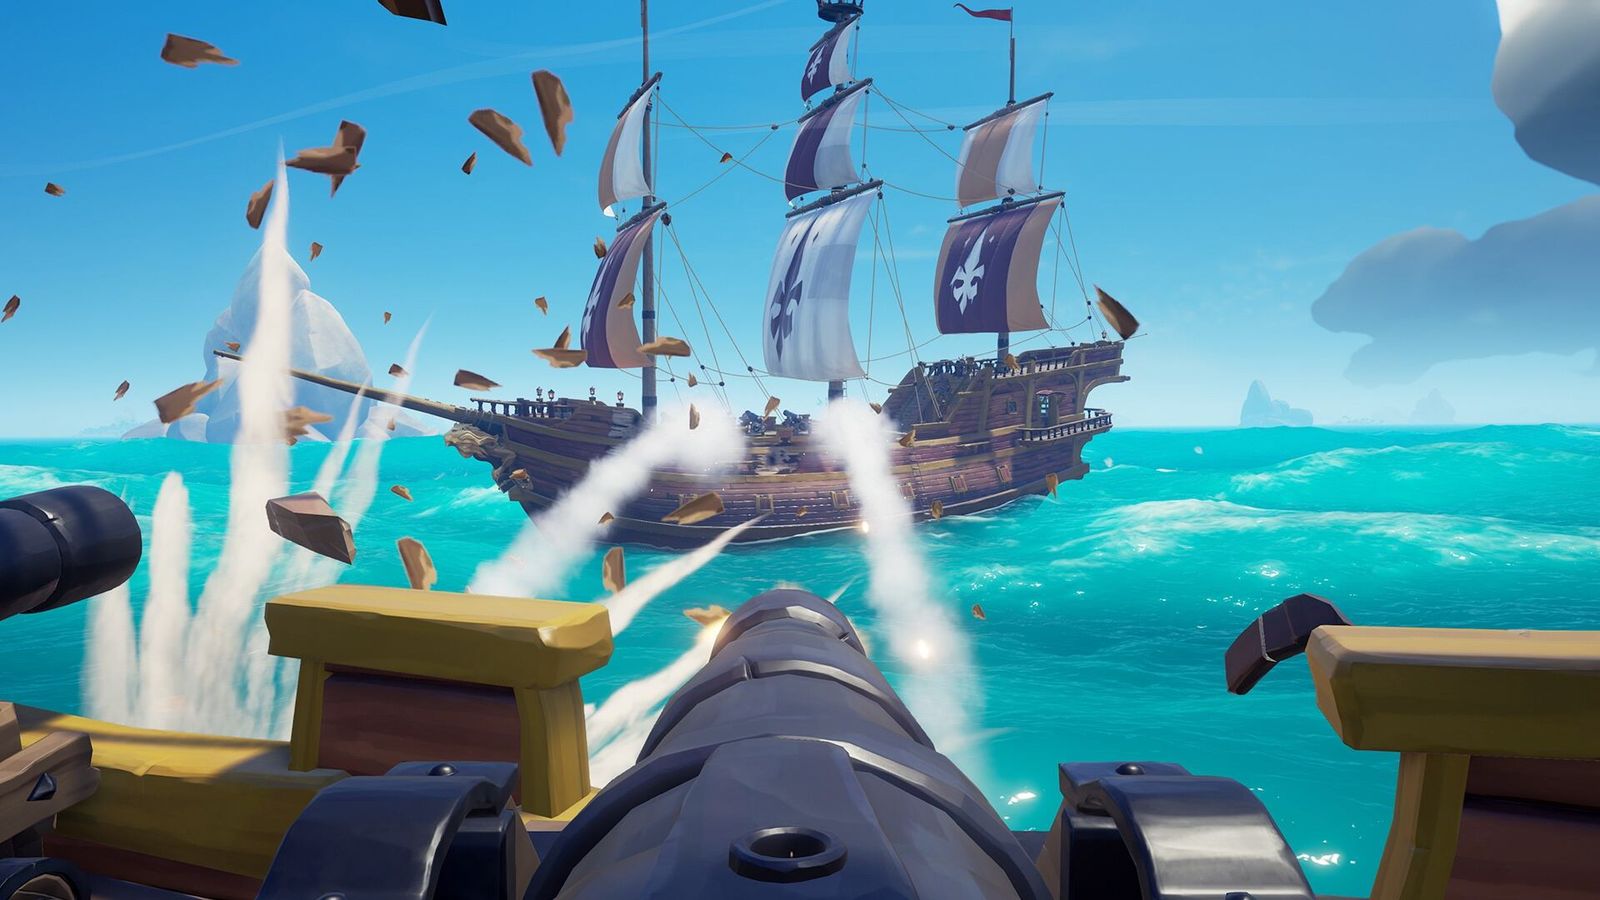 Cannons attacking a ship in Sea of Thieves.